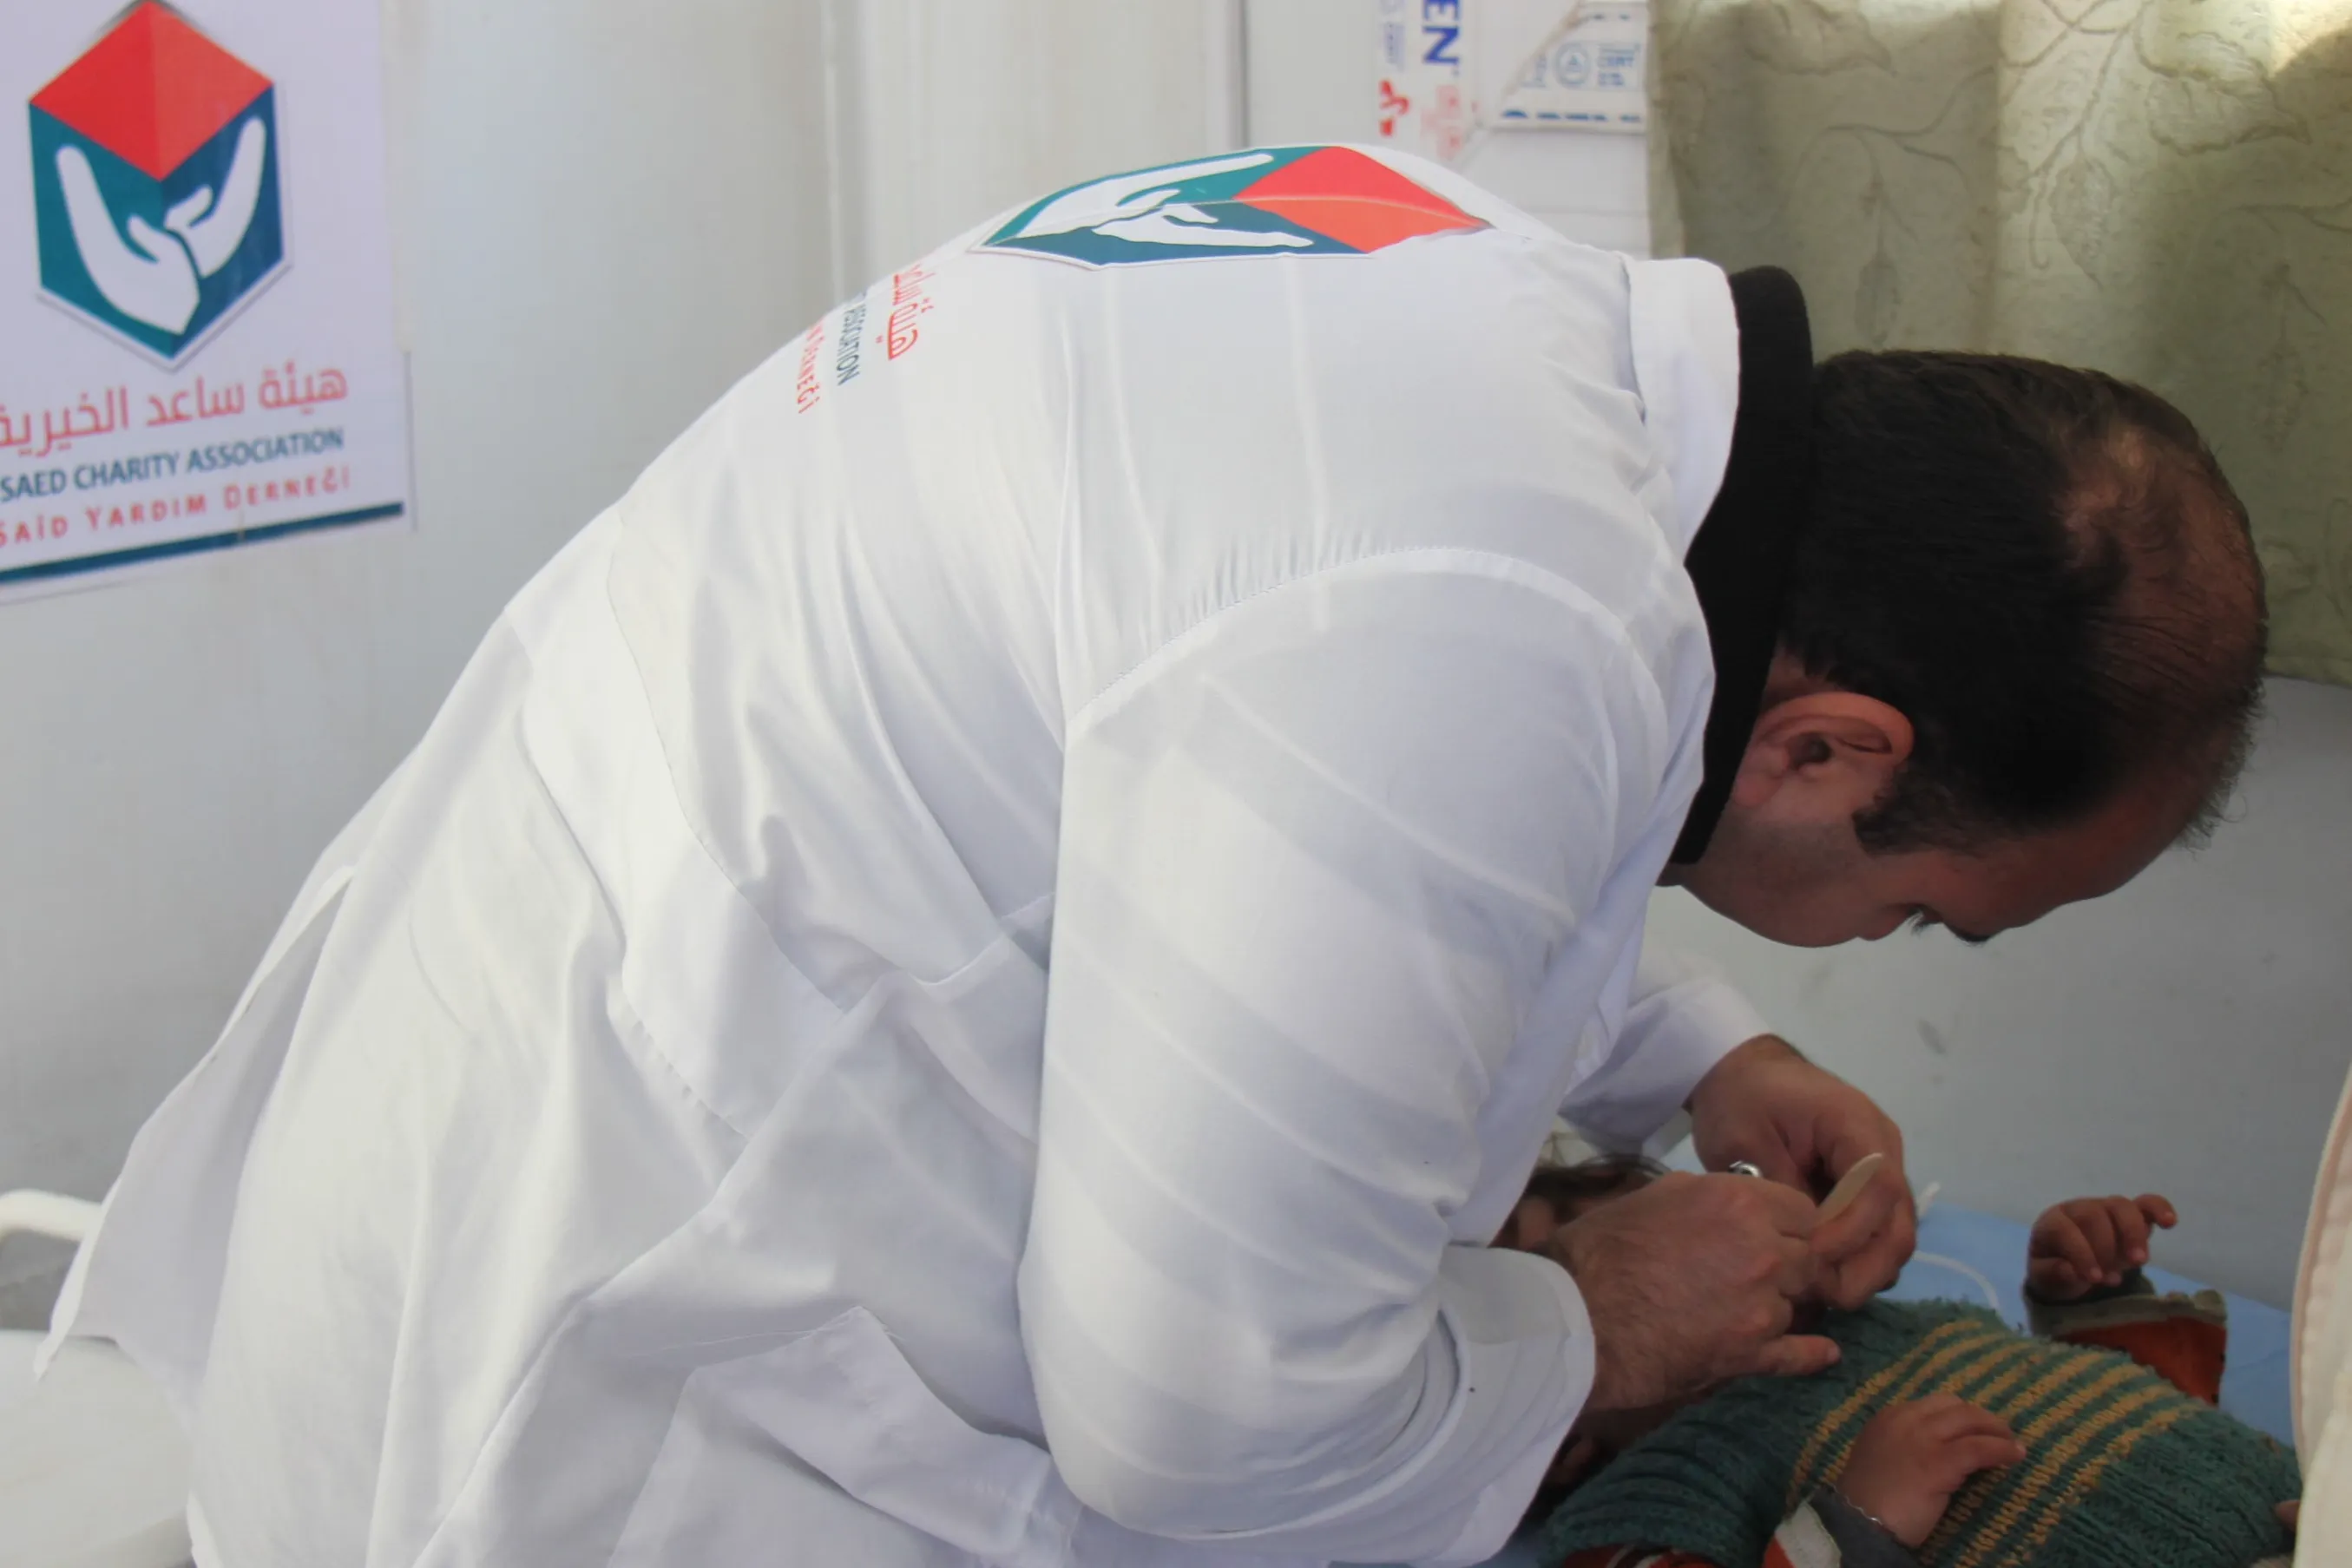 Operating mobile clinics to provide medical services and health care to the displaced who are not served by medical services